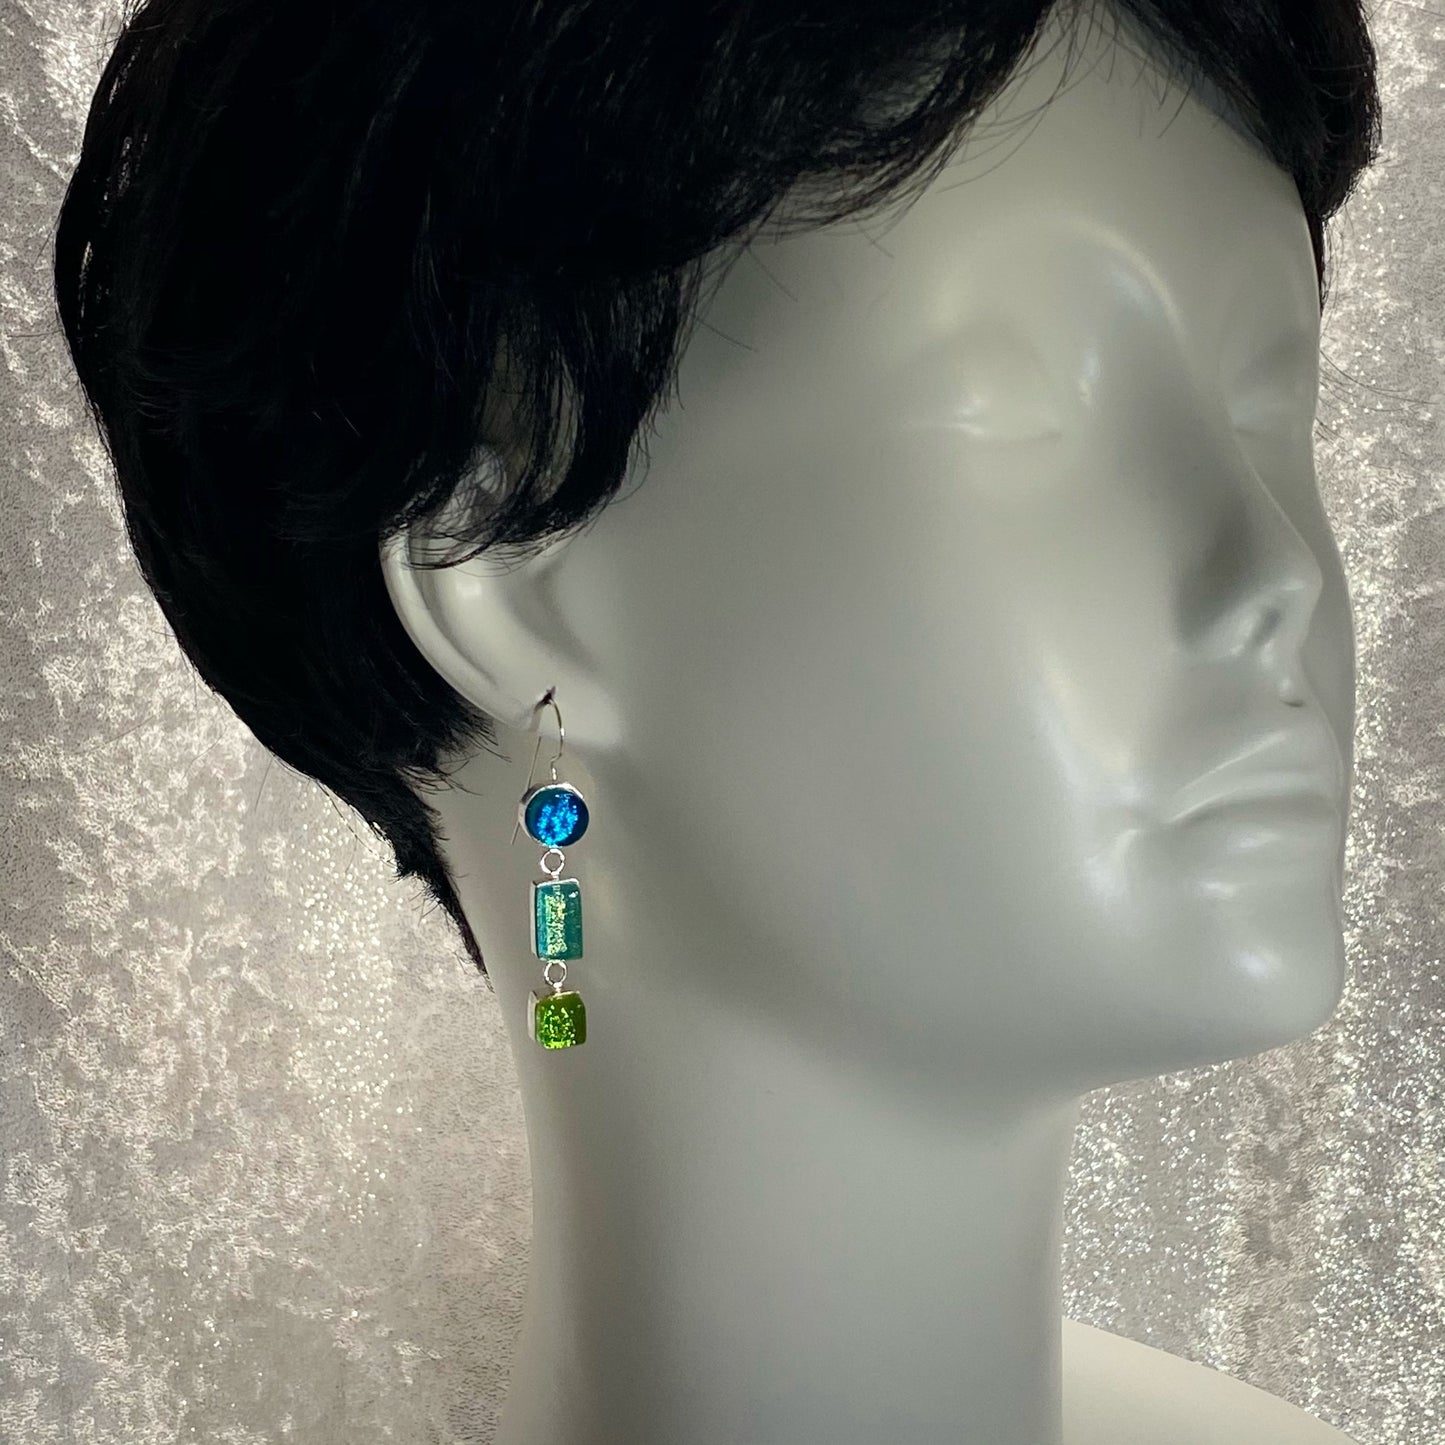 blue, green, triple drop earrings, fused glass, glass jewelry, glass and silver jewelry, handmade, handcrafted, American Craft, hand fabricated jewelry, hand fabricated jewellery, Athen, Georgia, colorful jewelry, sparkle, bullseye glass, dichroic glass, art jewelry